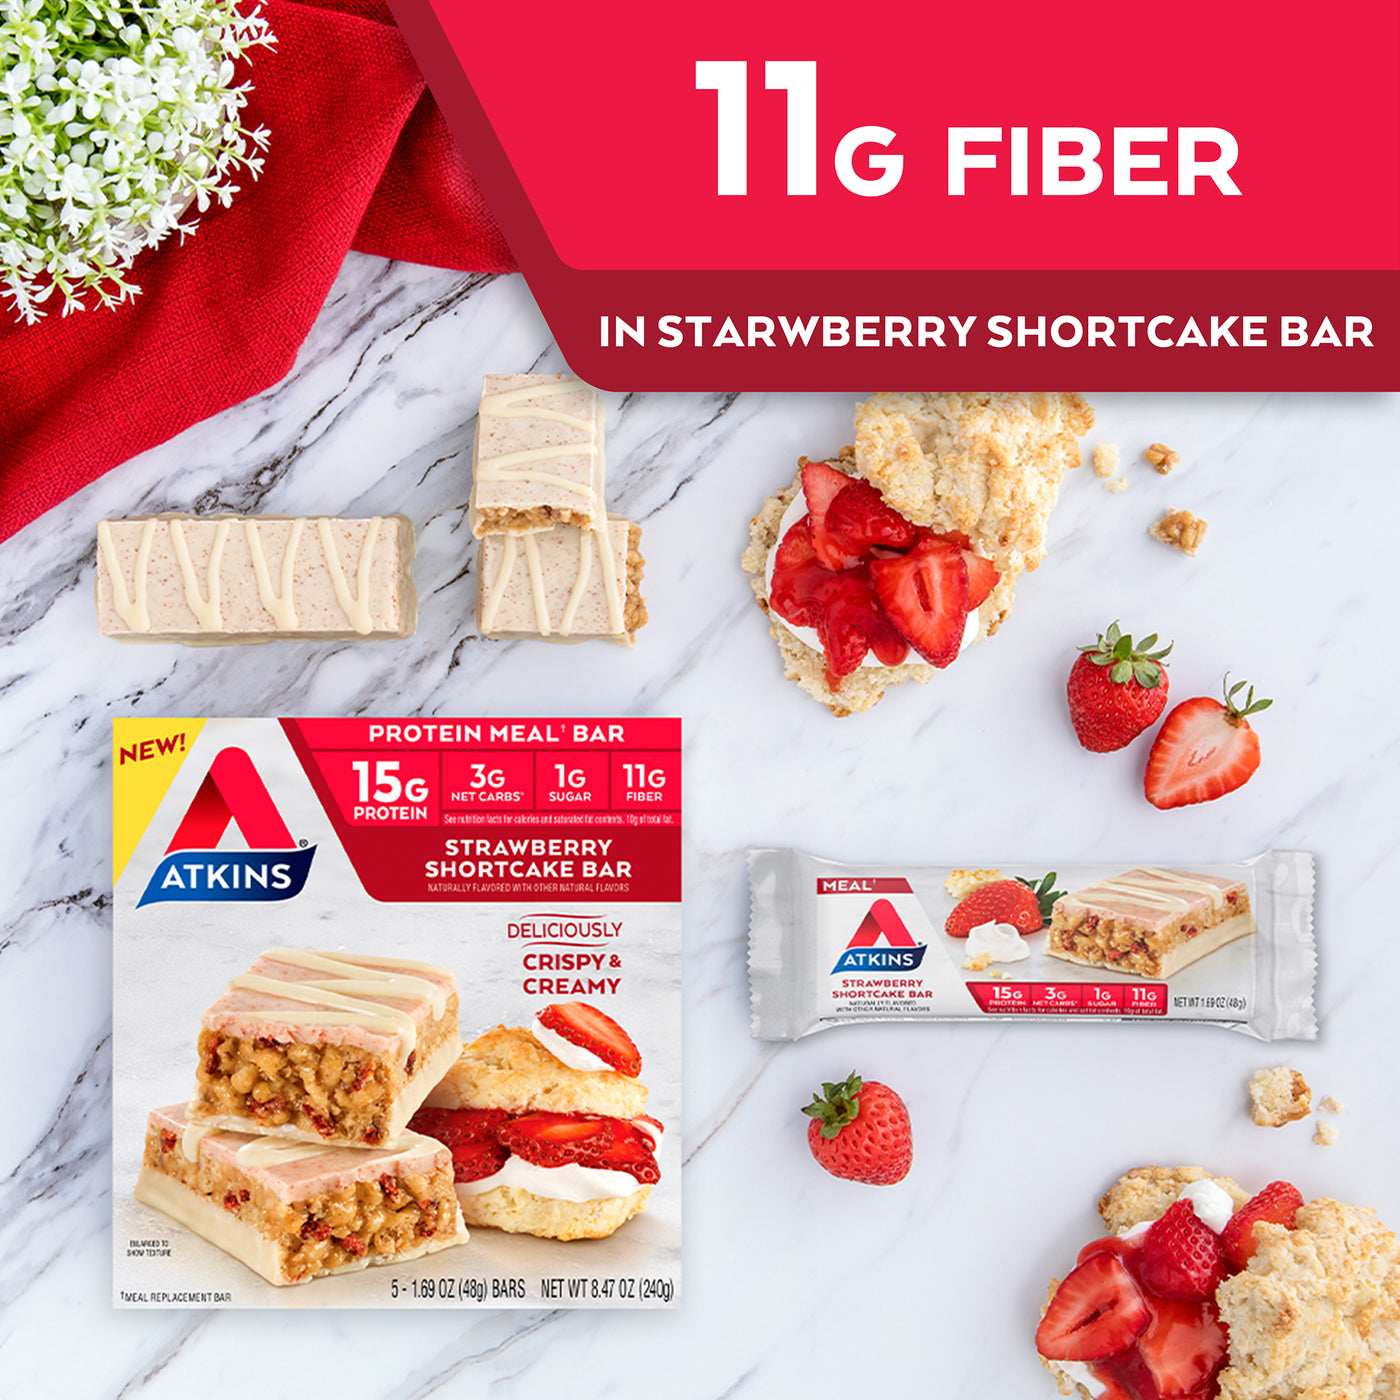 Strawberry Shortcake Bar with strawberries, shortcake and red cloth on marble table; 11G Fiber in Strawberry shortcake bar